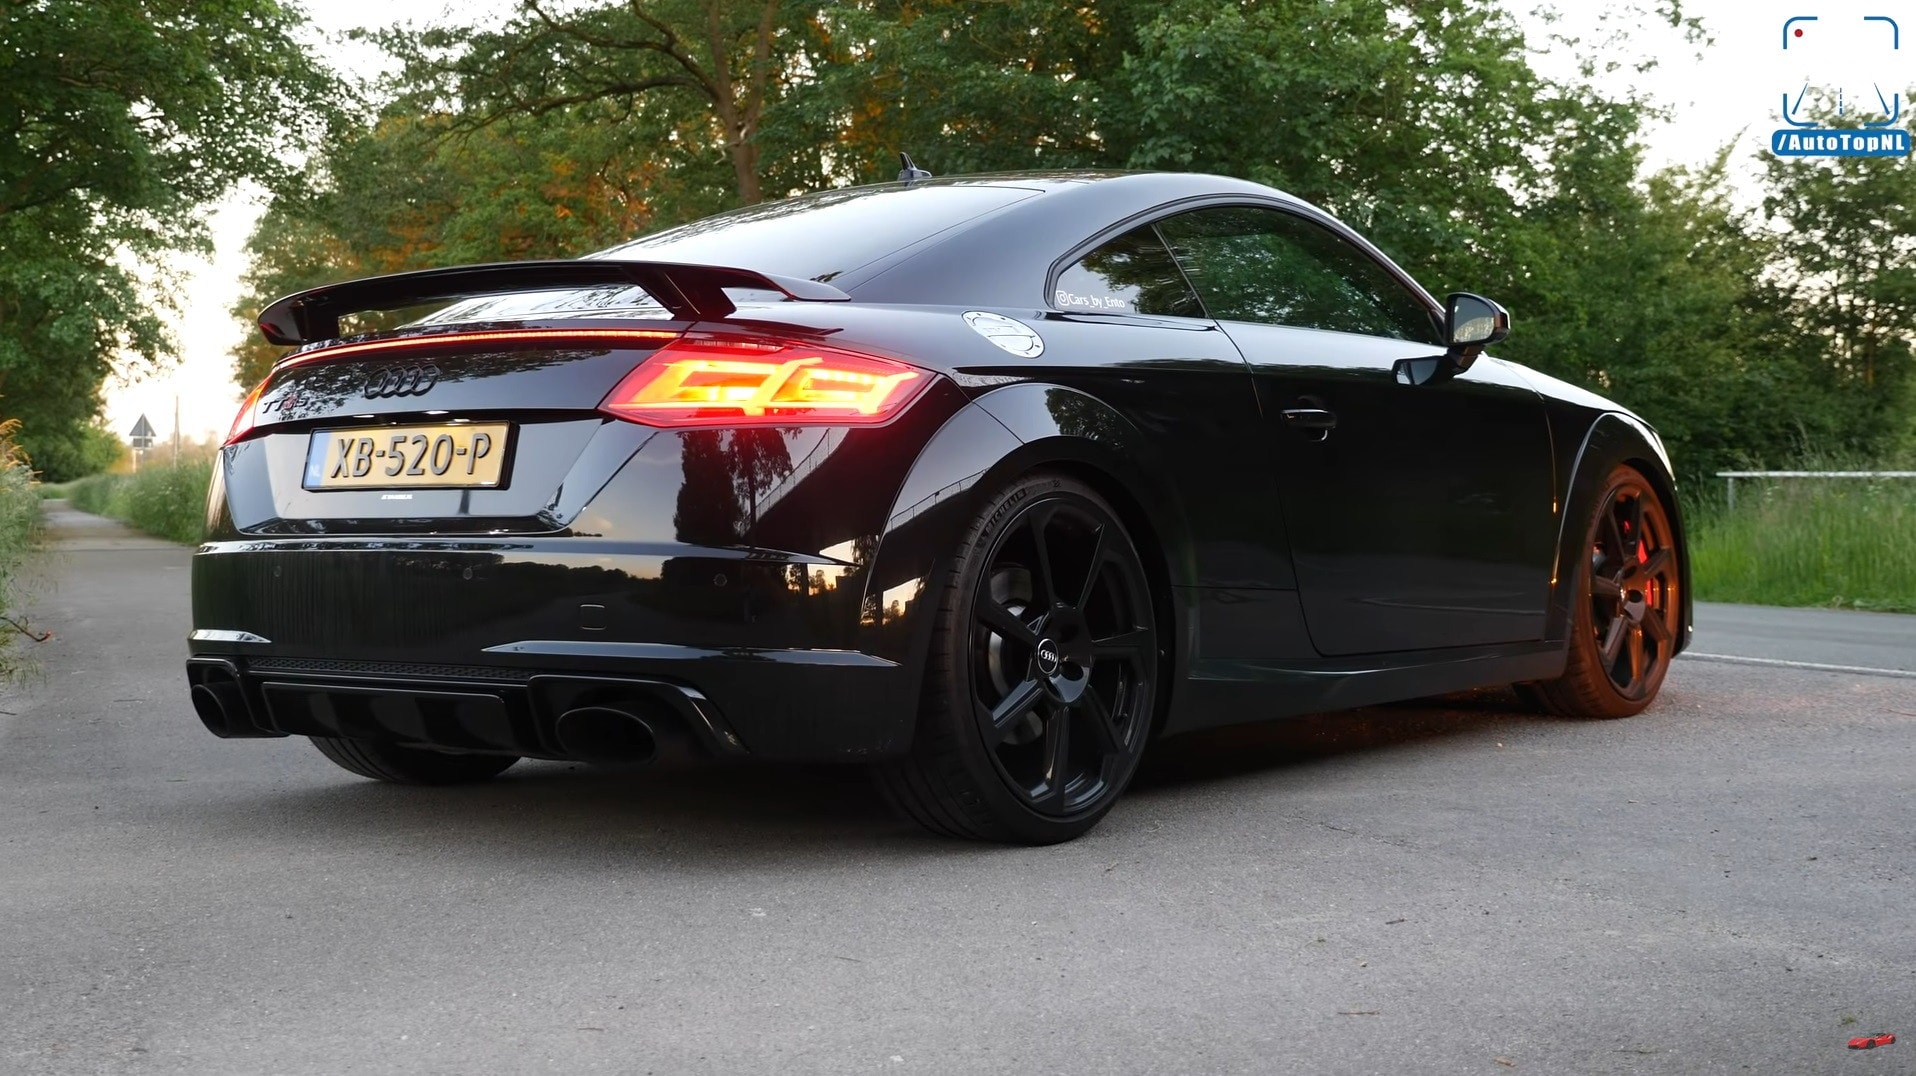 Audi TT RS Finds Its G Spot With 616 HP Tune, Hits 197 Mph on the